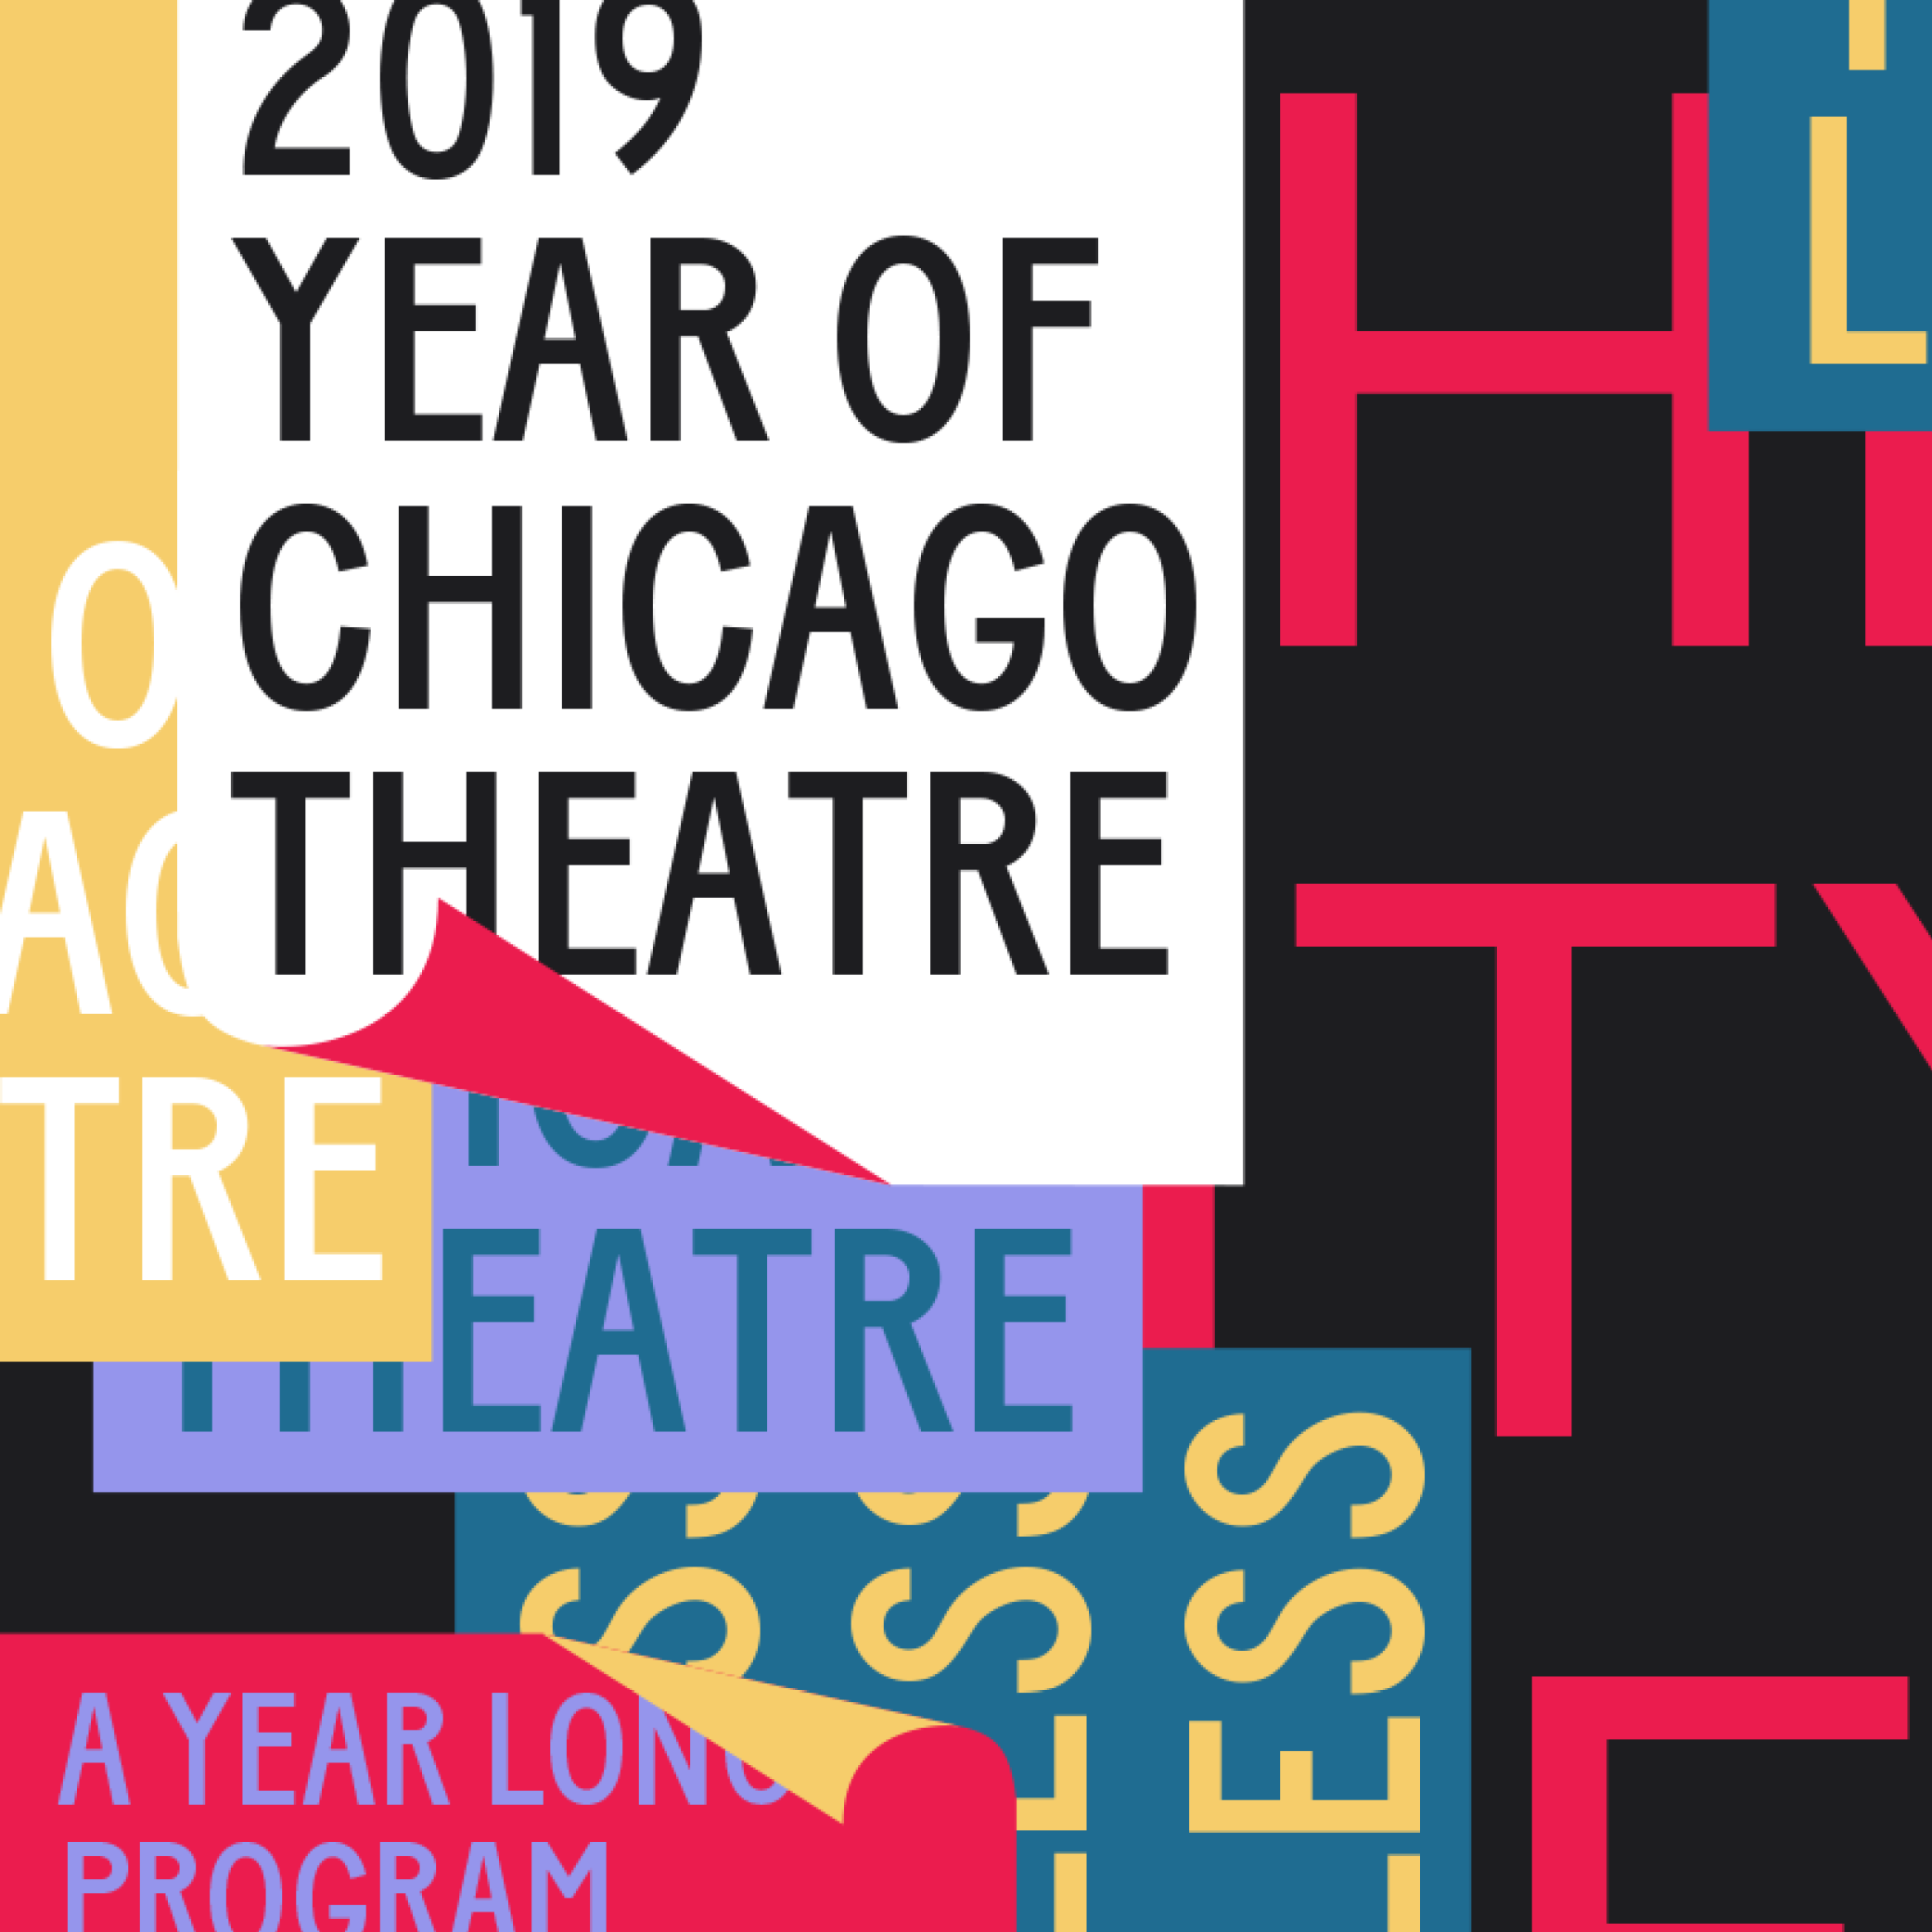 2019 Year of Chicago Theatre